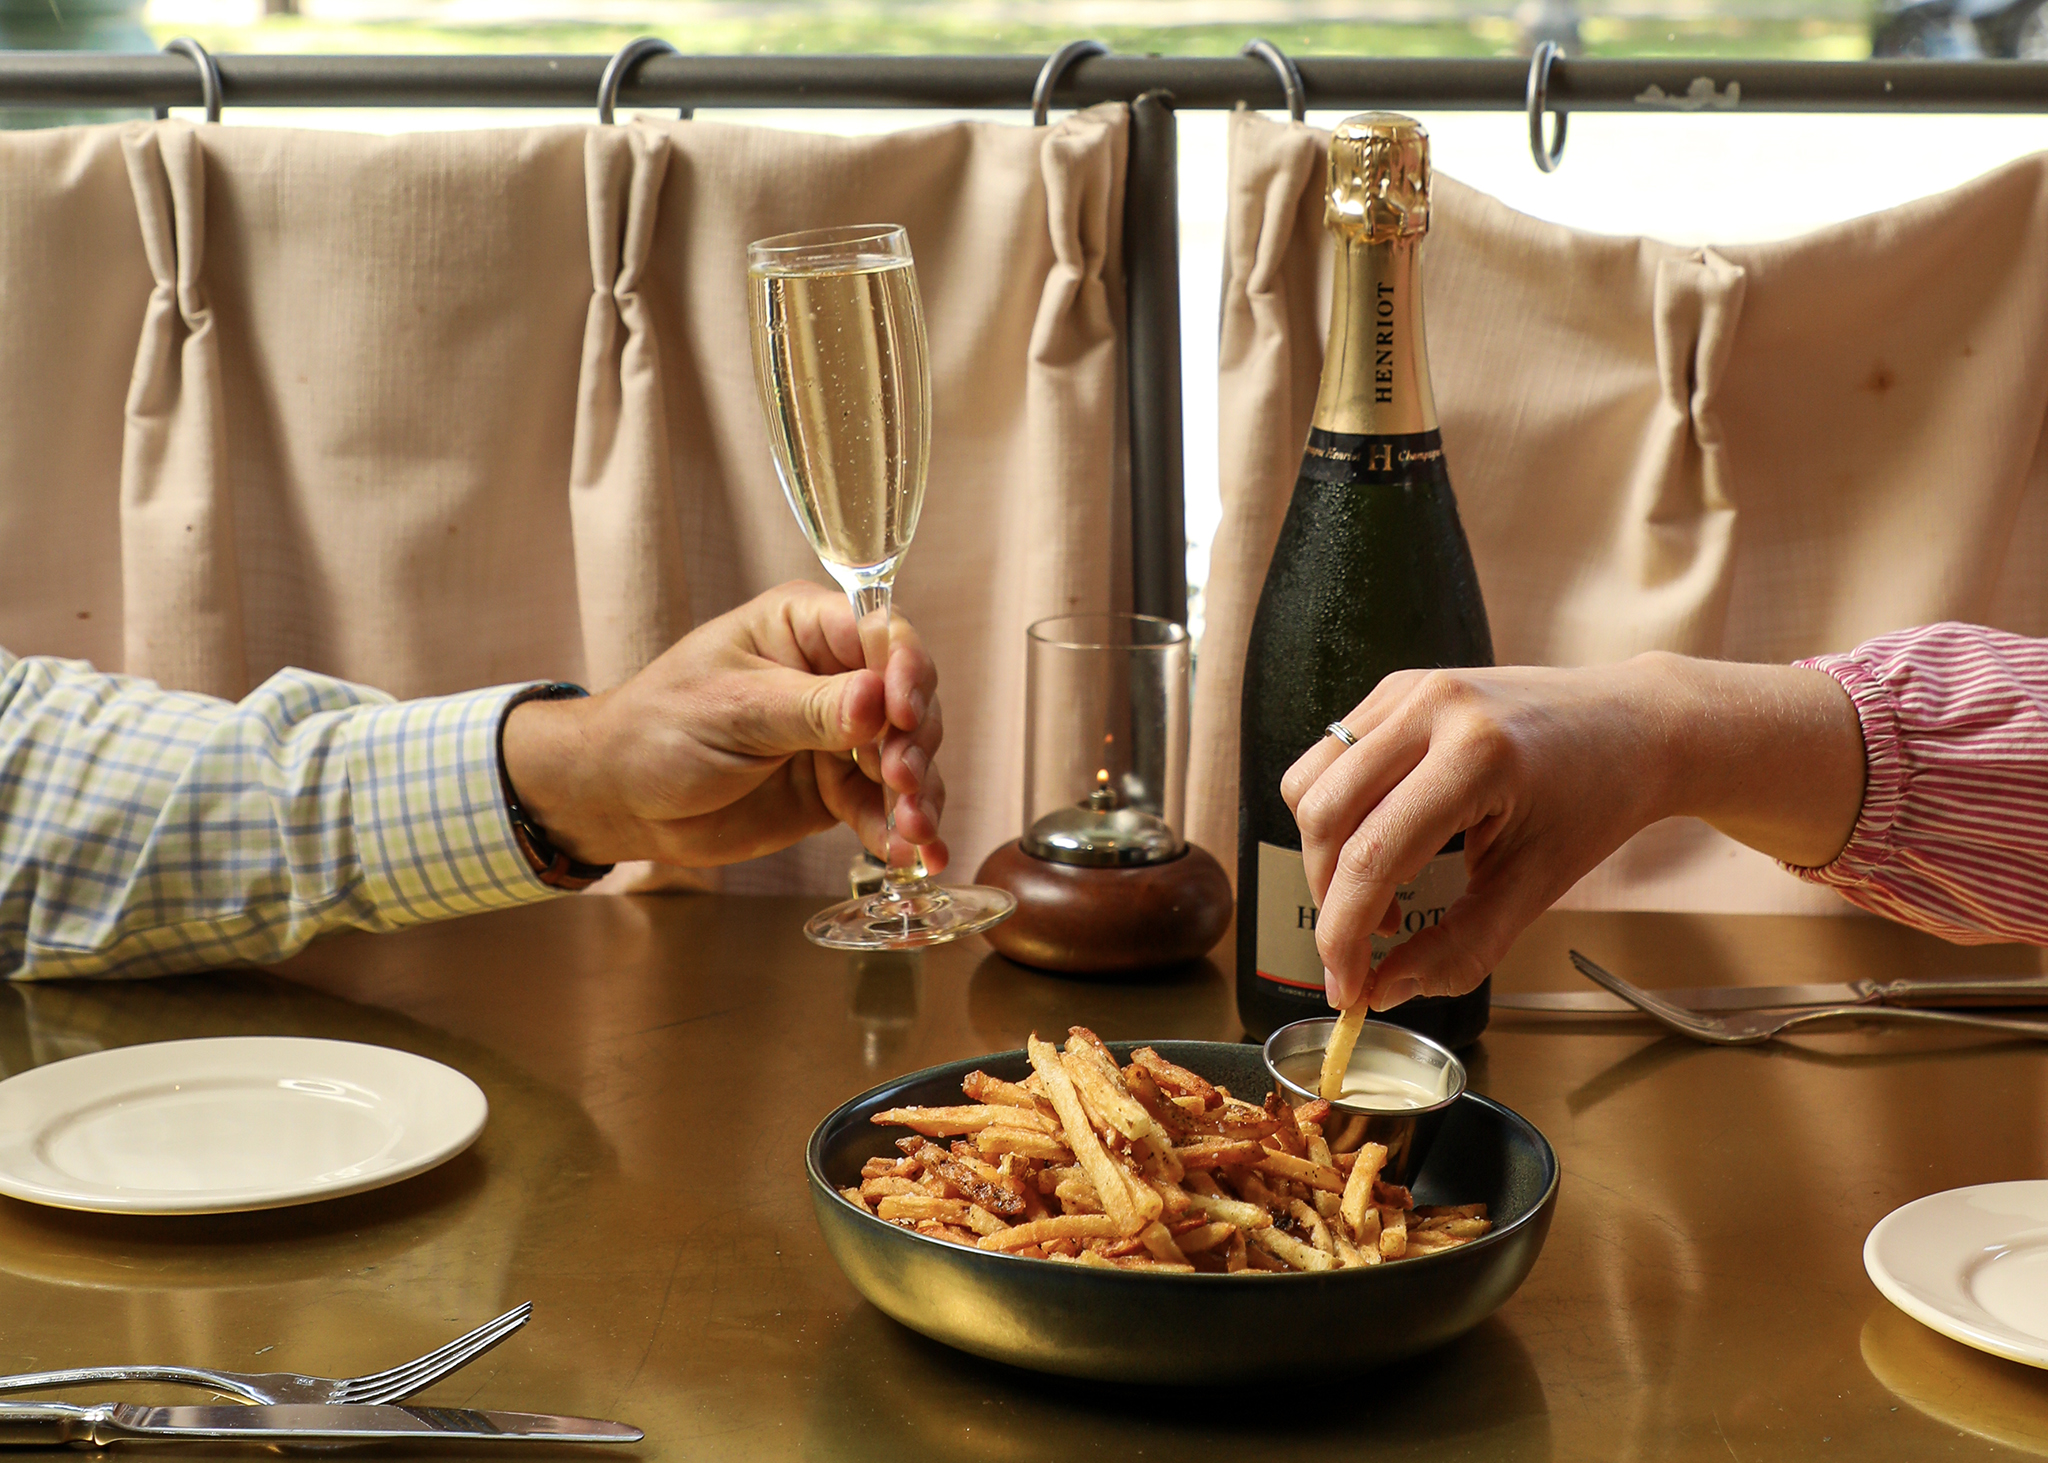 Fizz & Frites at Happy Hour! Accompanying Image